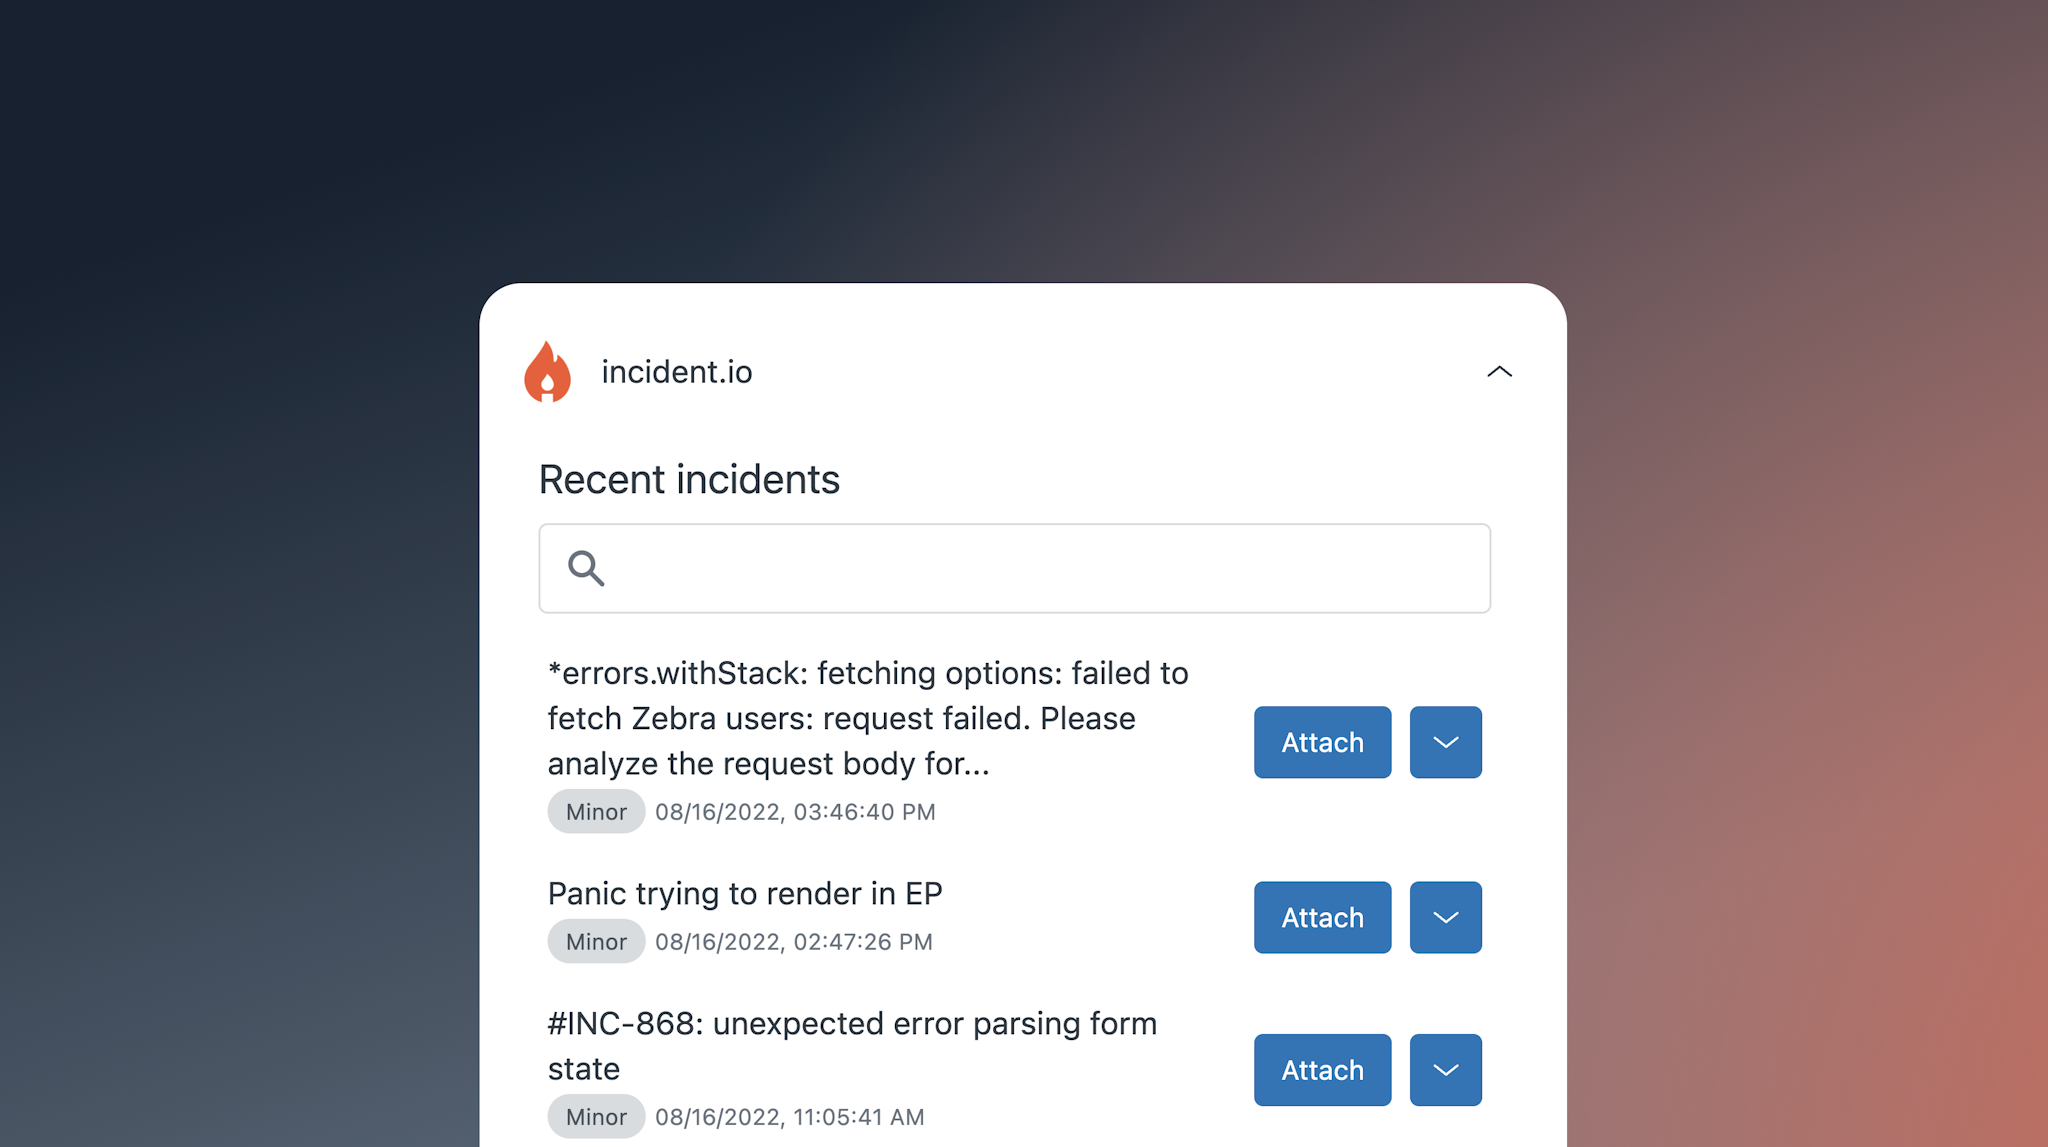 An image showing the incident.io Zendesk Support App listing incidents.